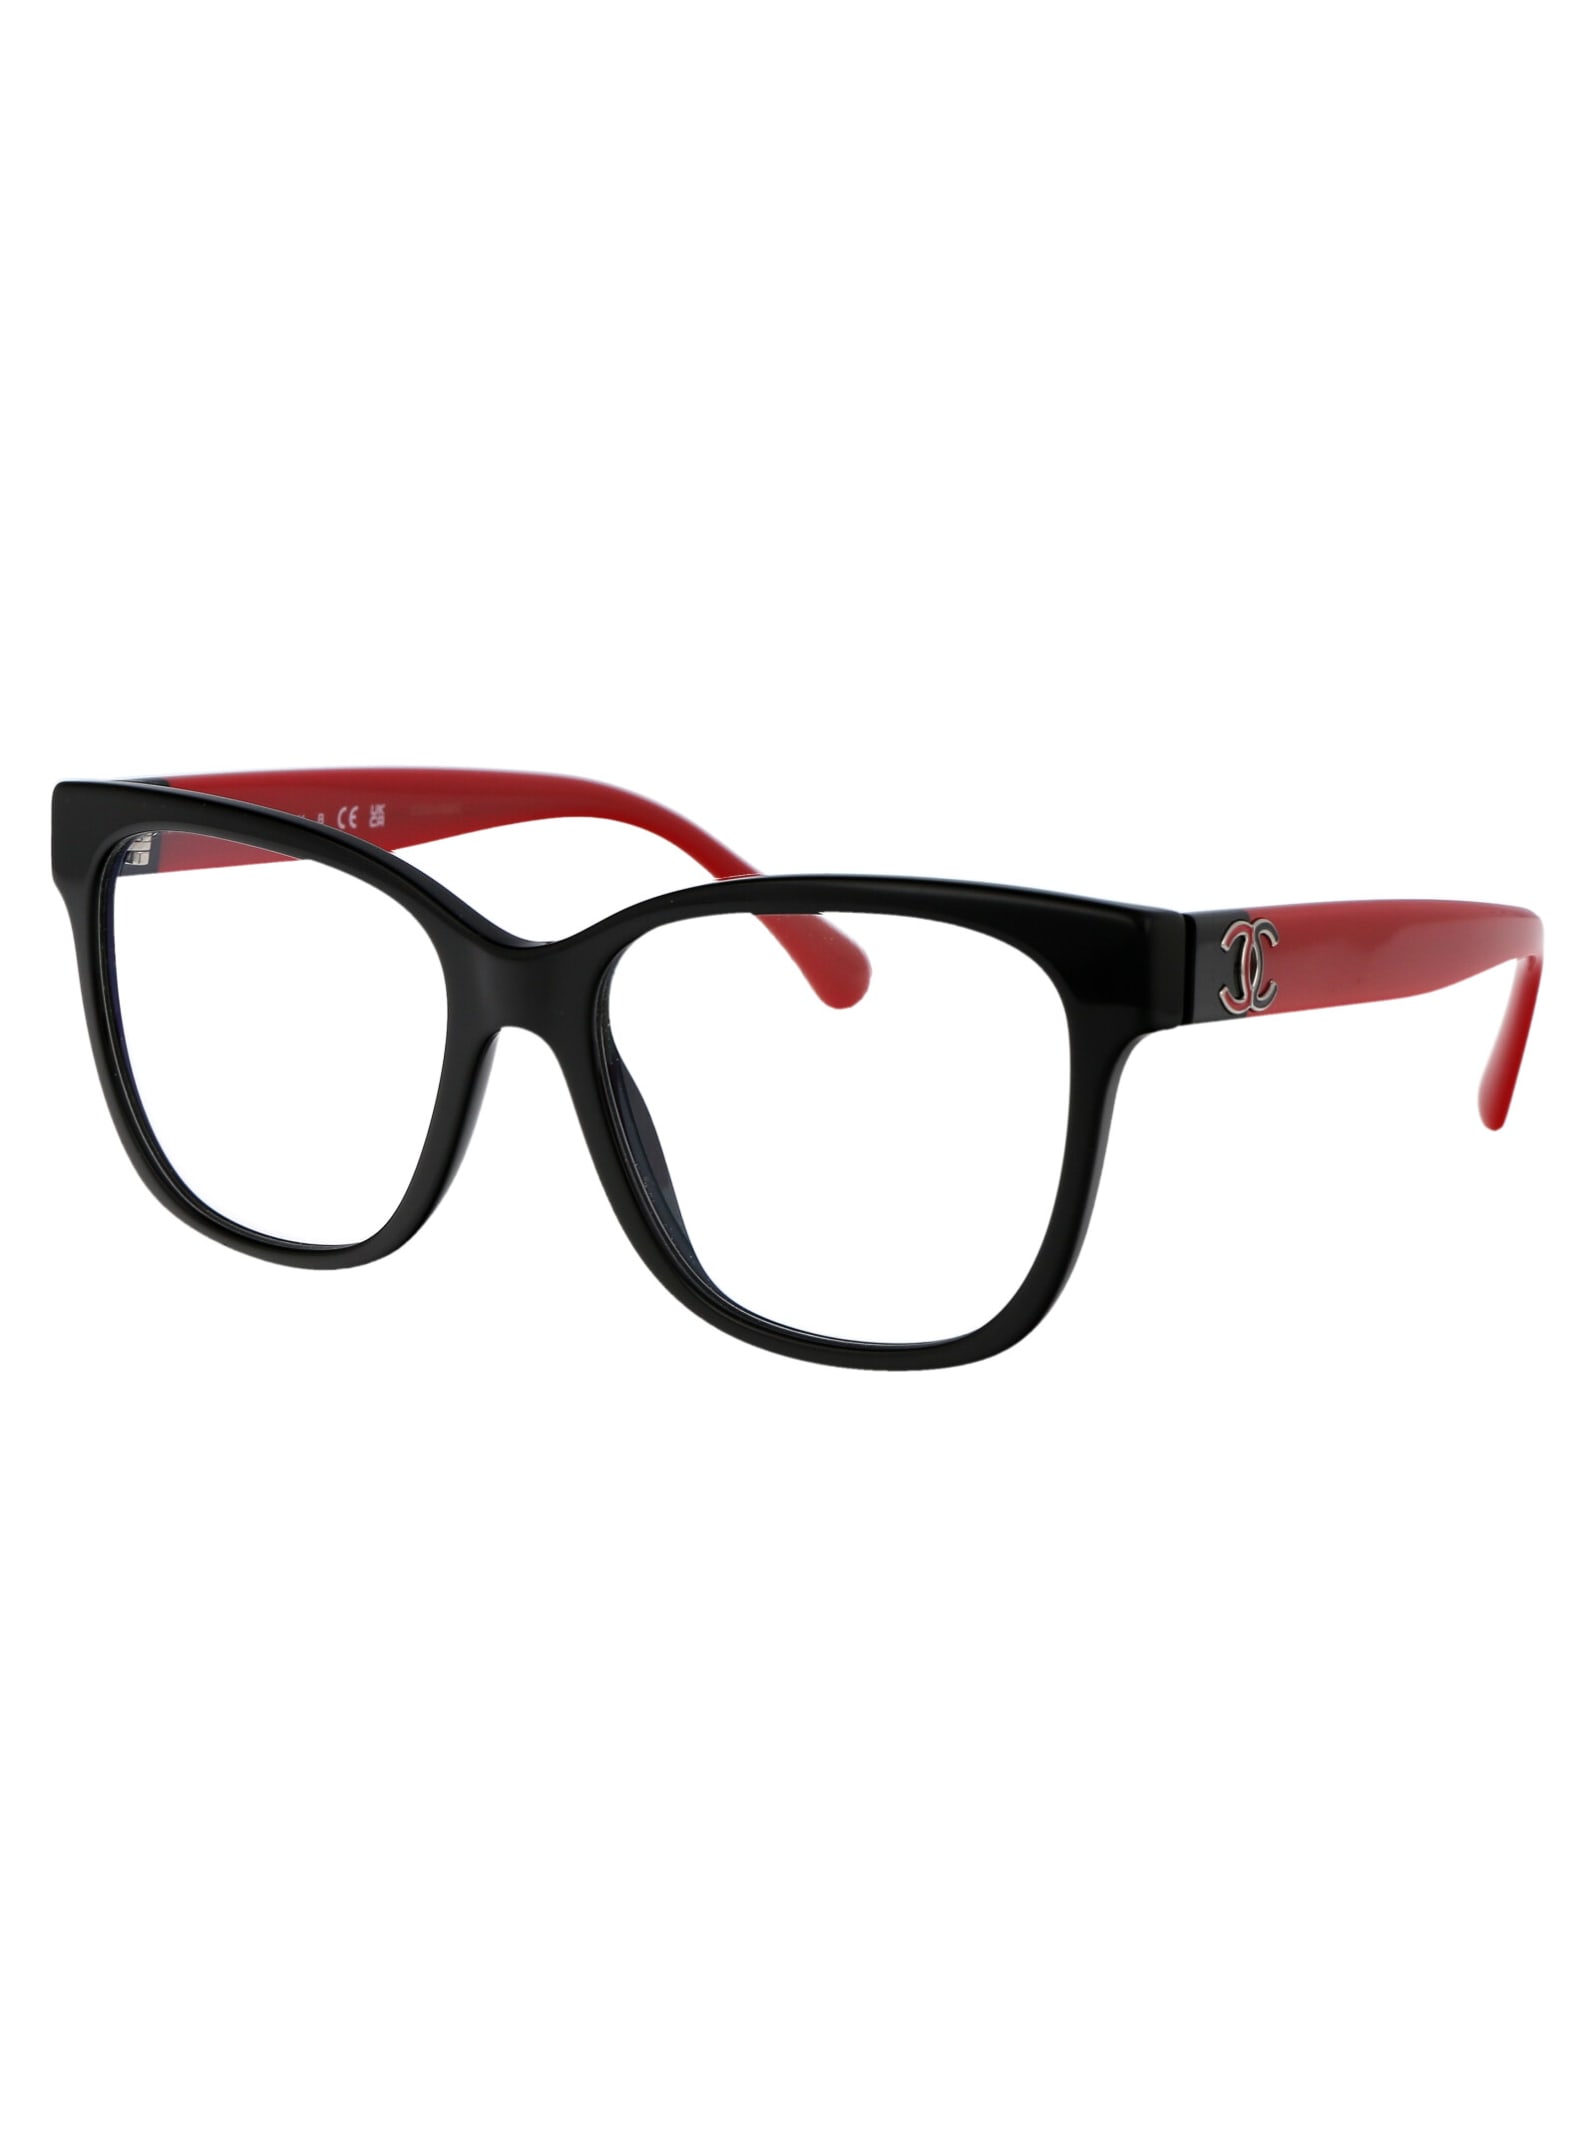 Pre-owned Chanel 0ch3472 Glasses In 1771 Black